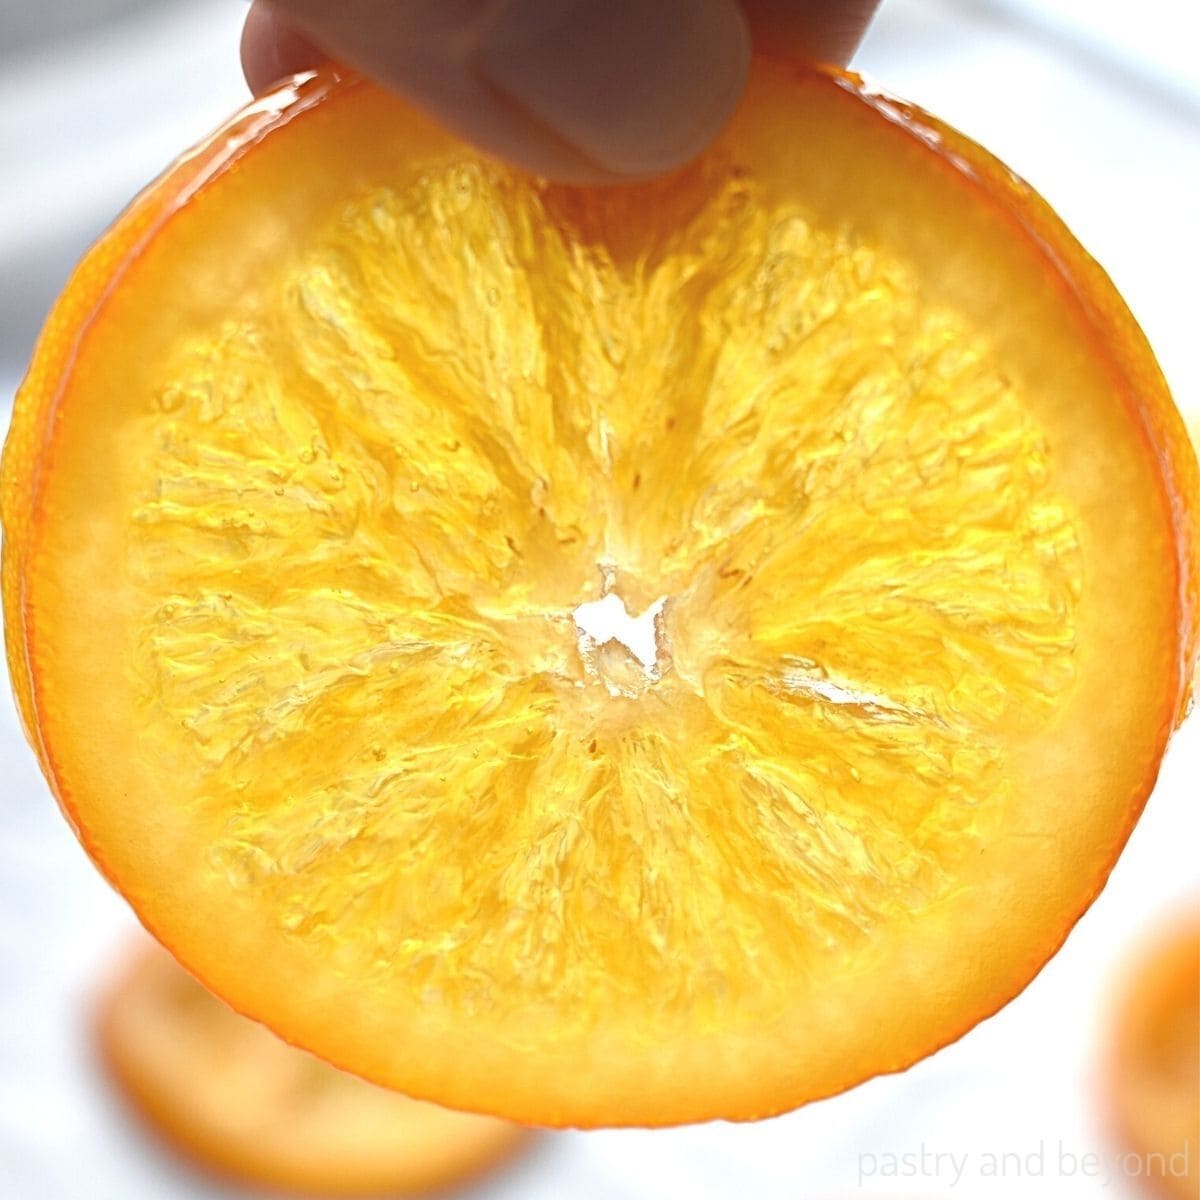 A hand holding a candied orange slice.